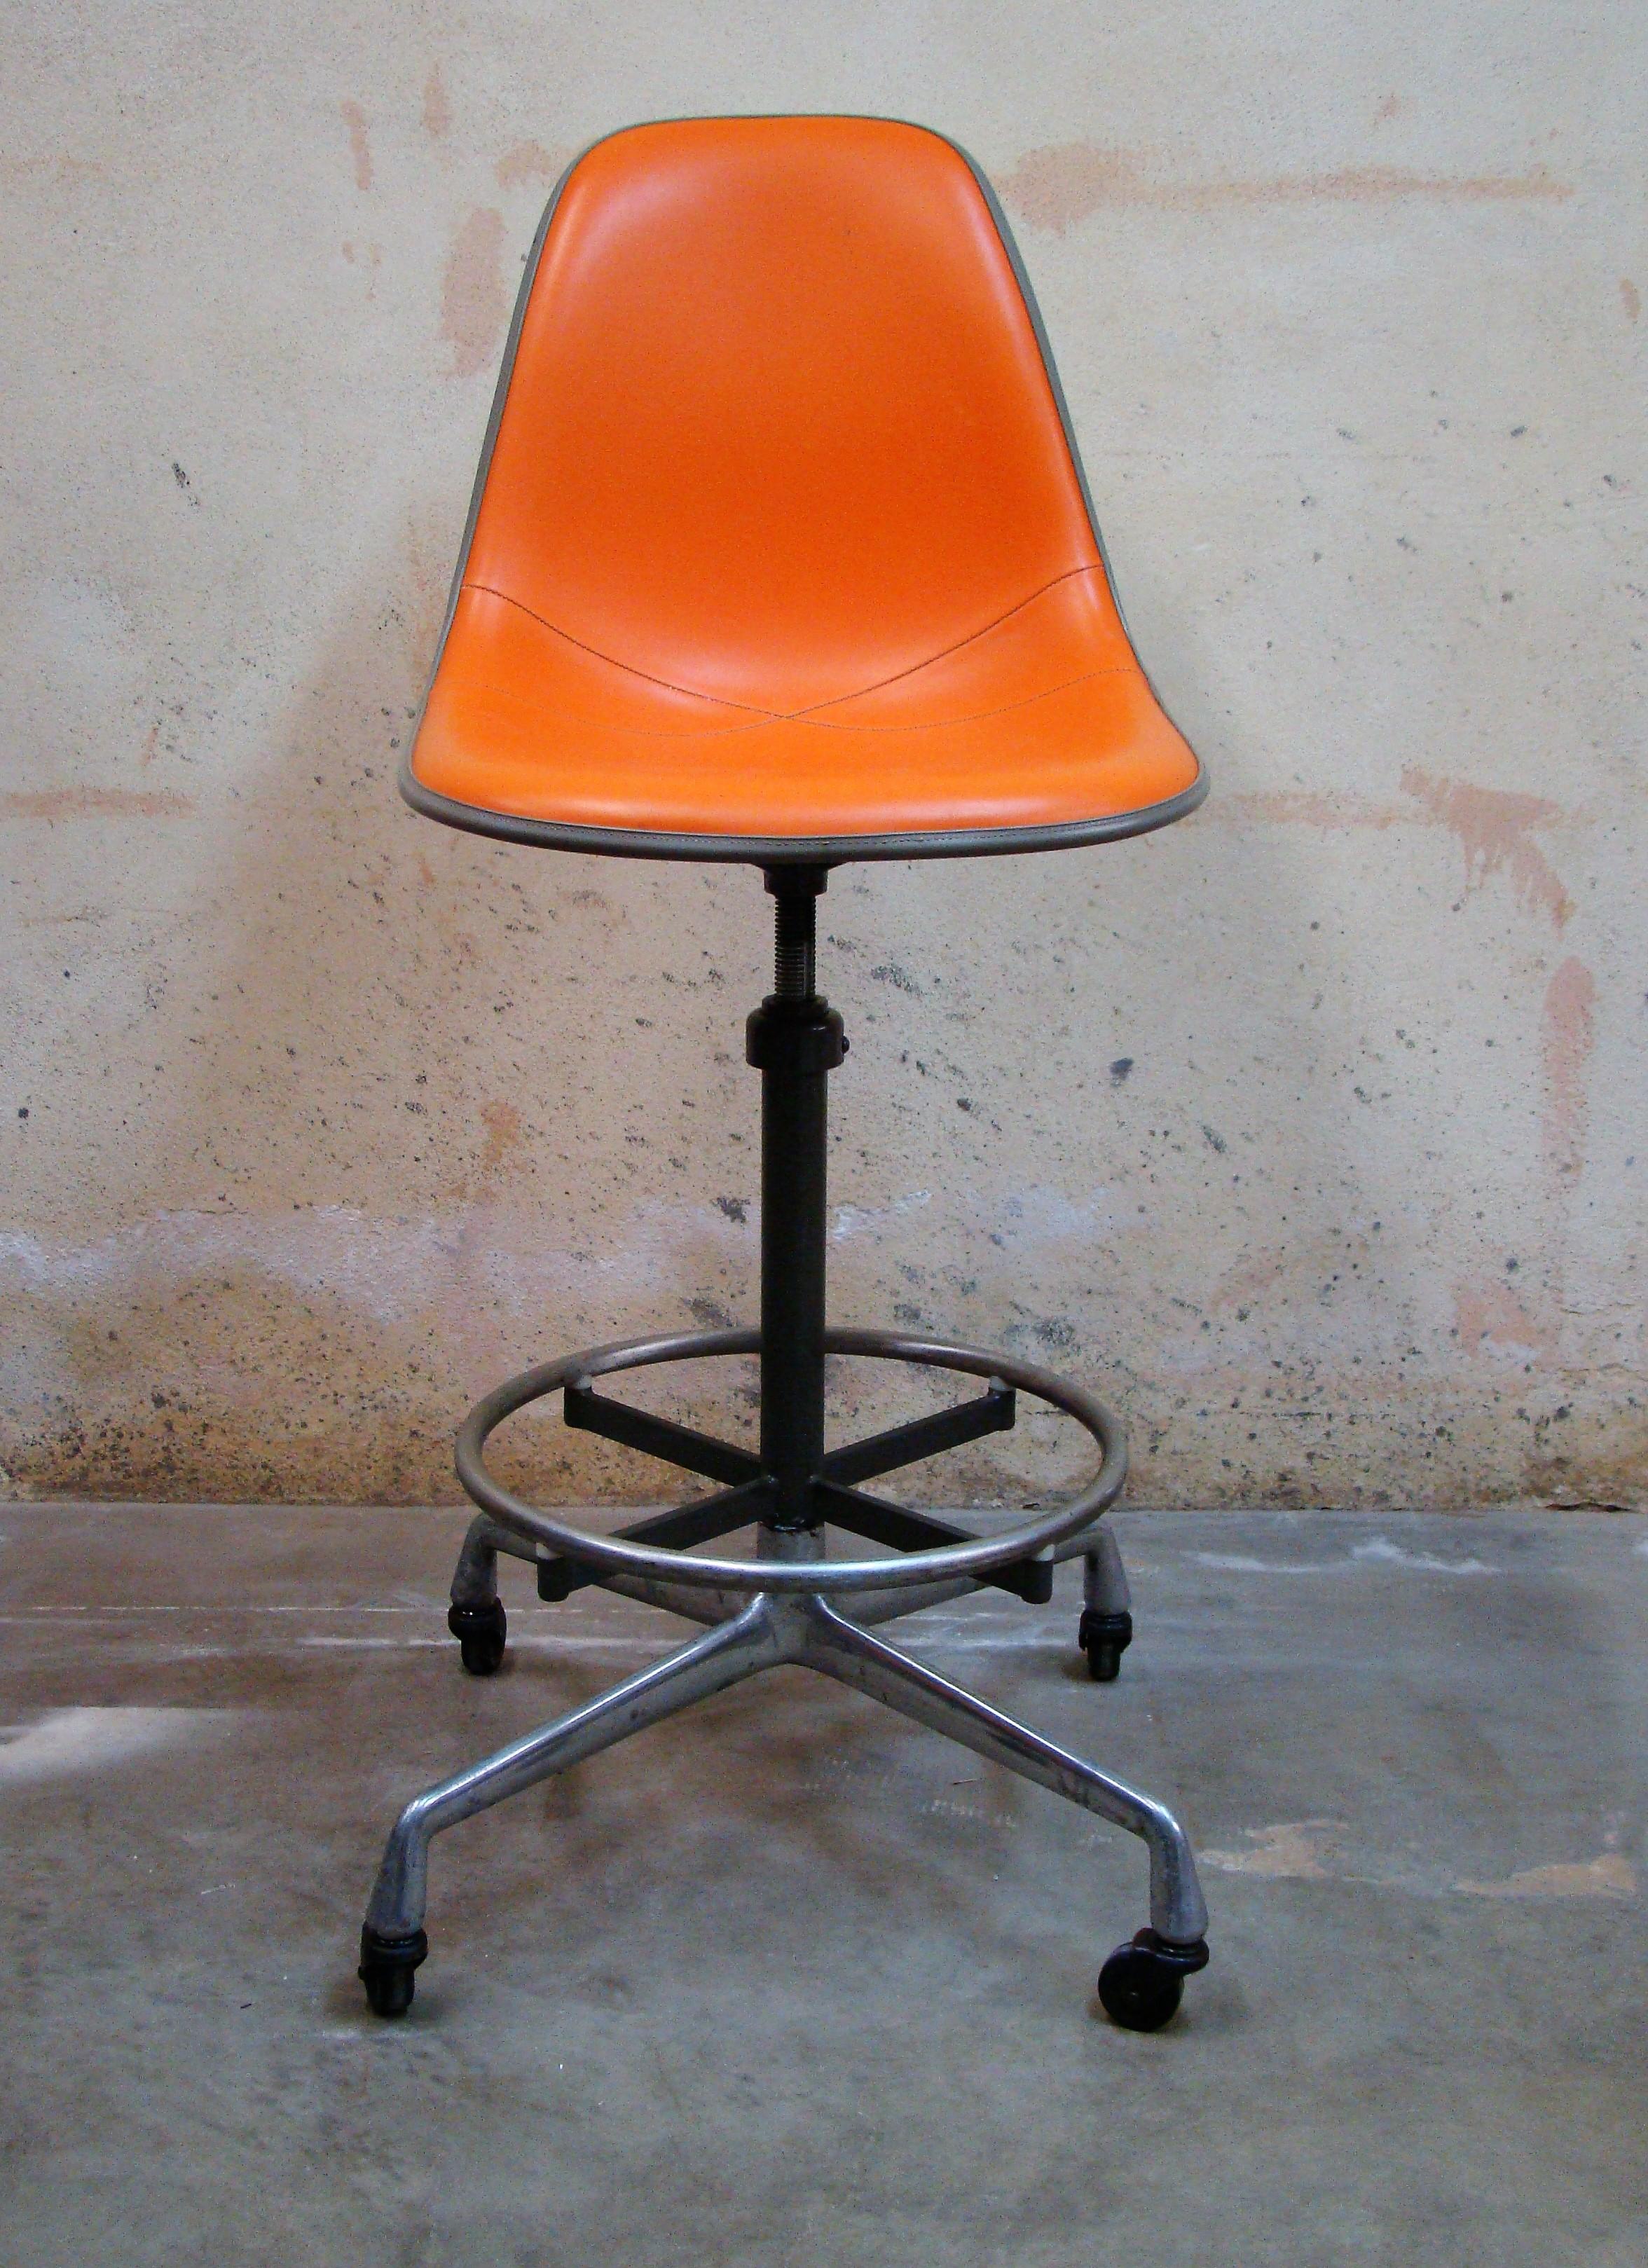 Original 1970s drafting stool designed by Charles and Ray Eames for Herman Miller (USA) with a striking orange upholstered white fiberglass side shell seat and 'Aluminum Group' swivel drafting stool base, adjustable in height with hard rubber